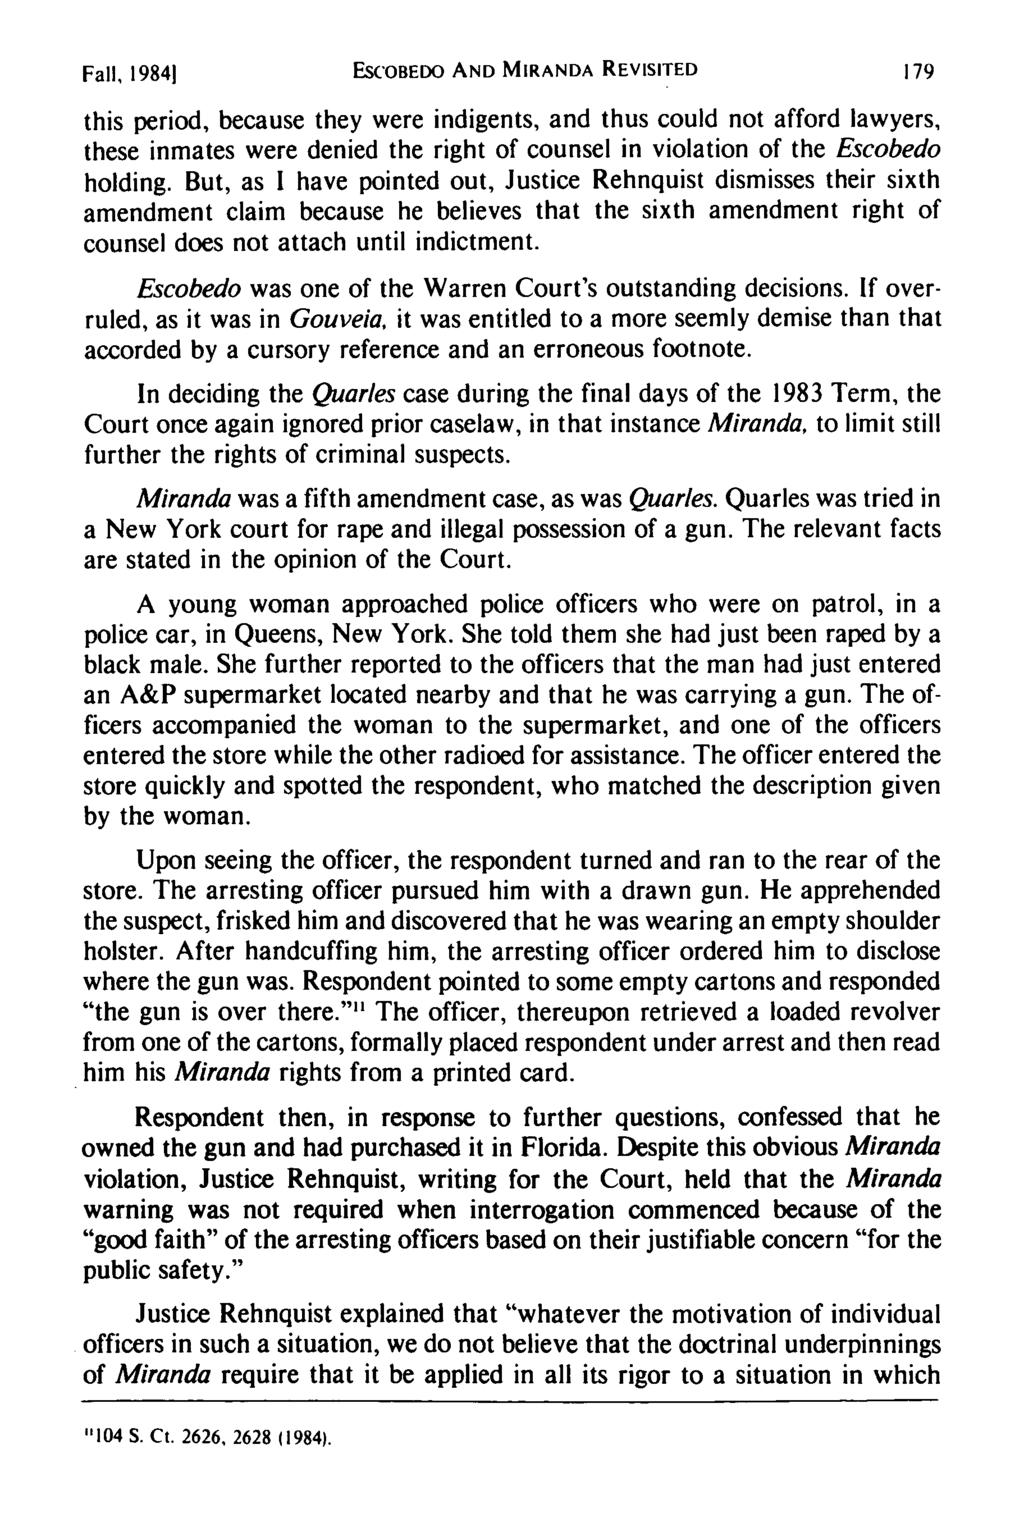 Fall, 19841 ESCOBEDO AND MIRANDA REVISITED this period, because they were indigents, and thus could not afford lawyers, these inmates were denied the right of counsel in violation of the Escobedo